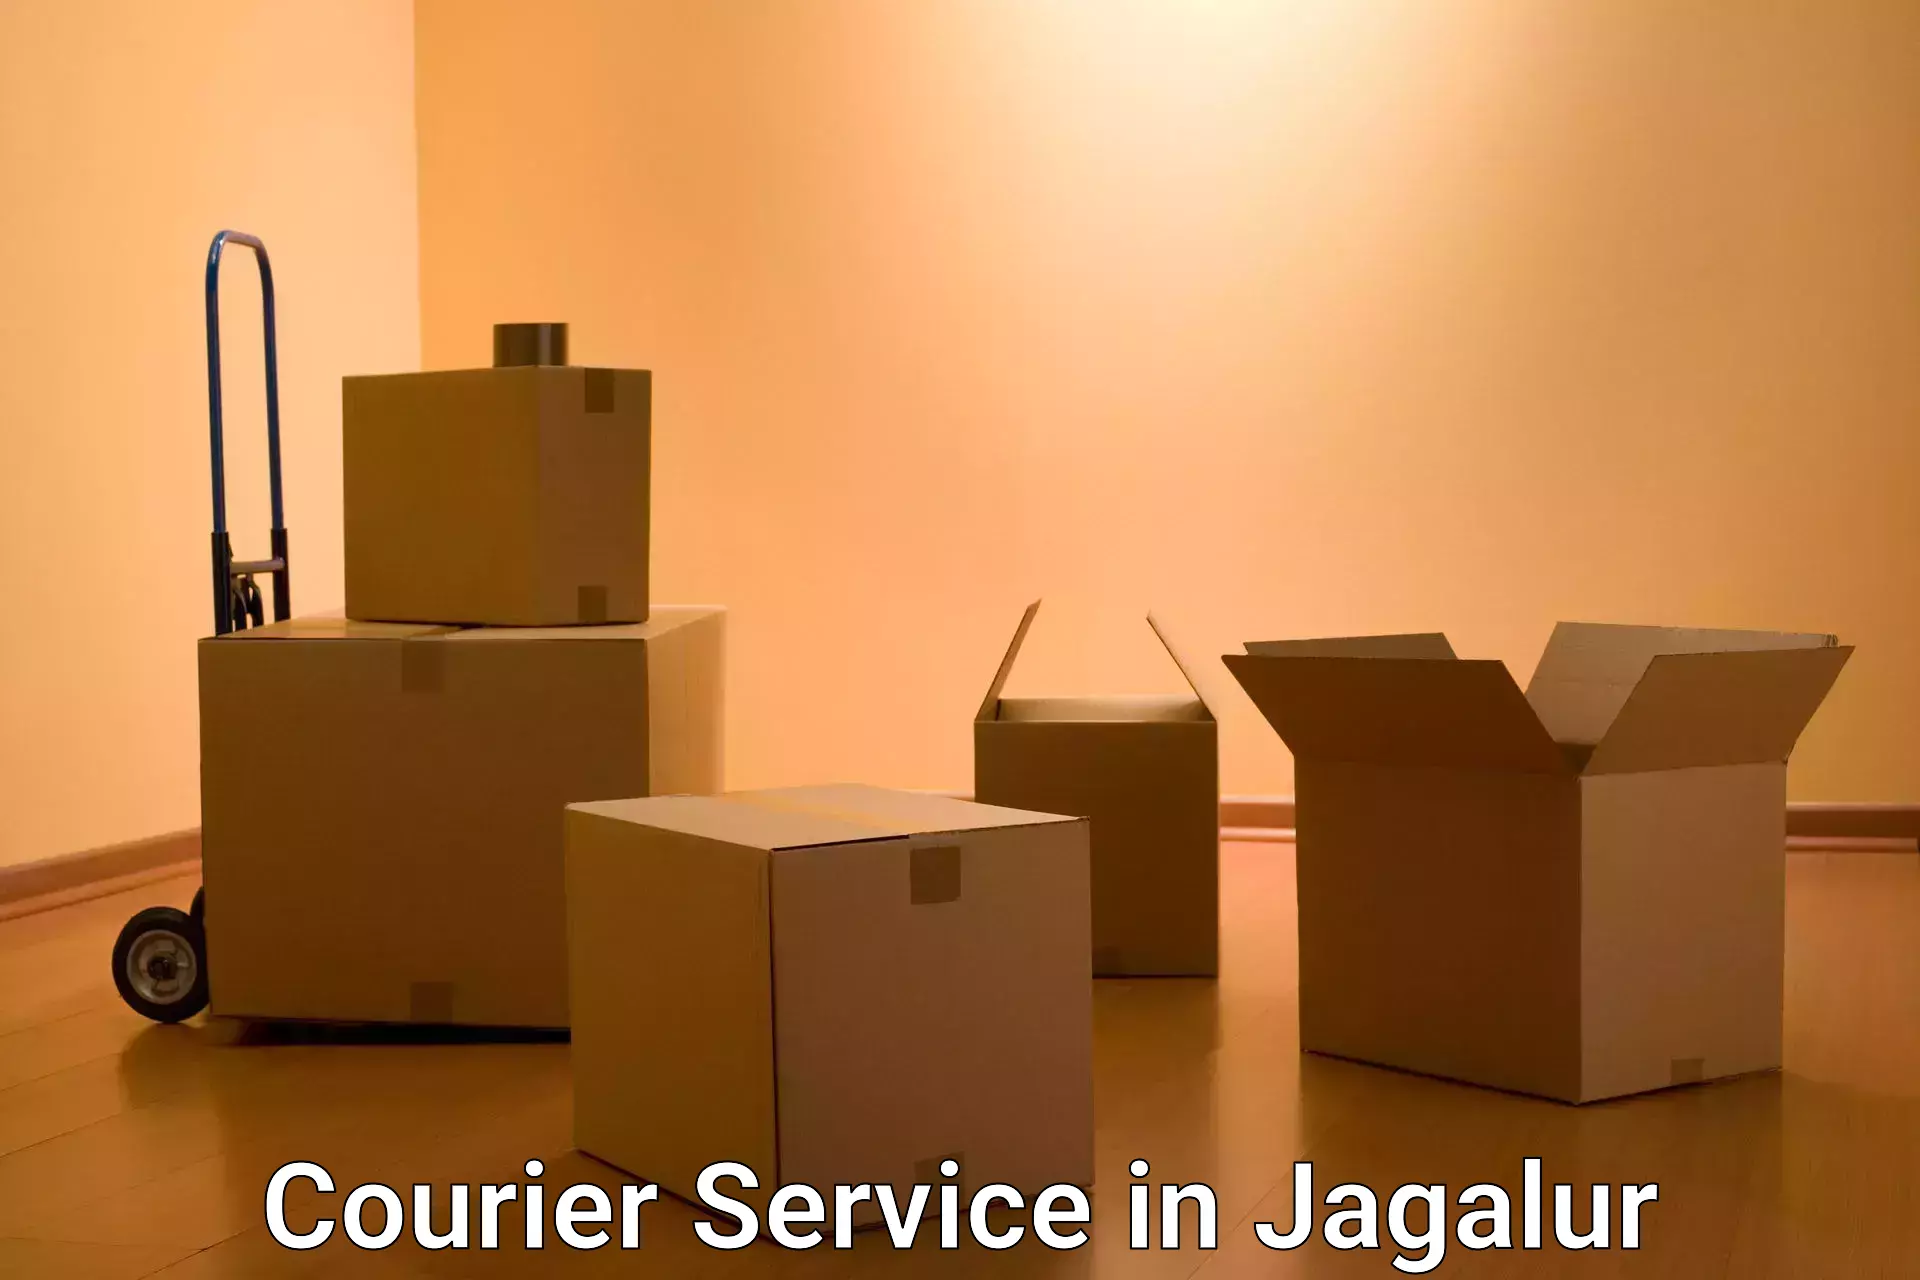 Business delivery service in Jagalur